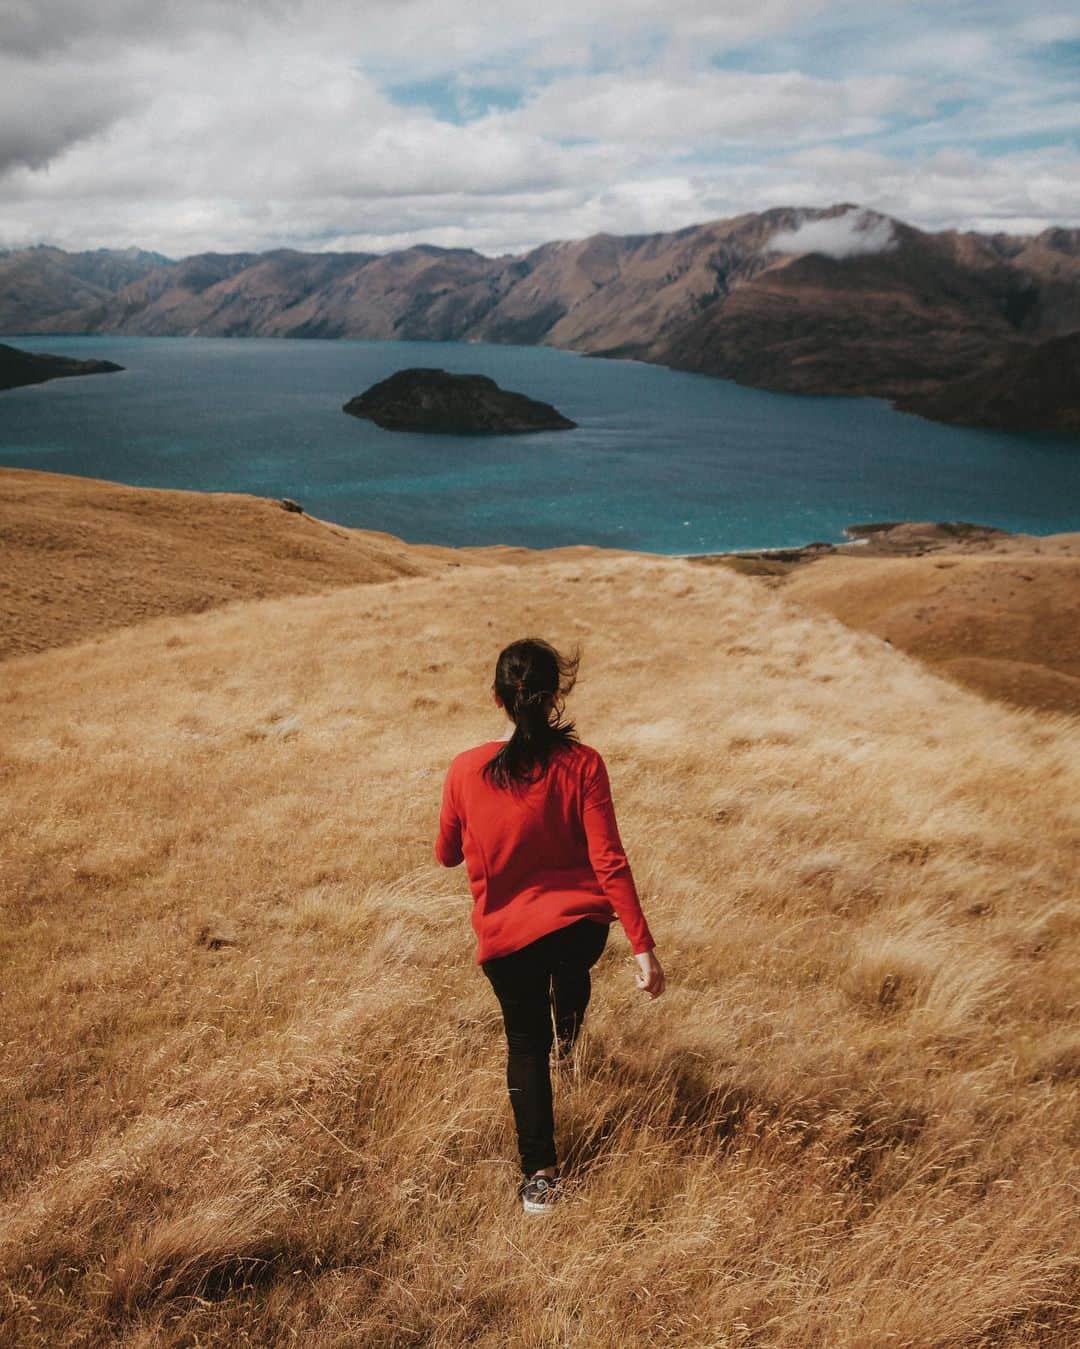 Putri Anindyaのインスタグラム：「Walking down memory lane // reposting one of my favorite picture in one of my favorite place on earth, Wanaka New Zealand. Thanks to the broken tripod that I had that time. This was taken with my old 500D canon with tamron 17-50mm 2.8. But i think the quality was good enough for me to remember this surreal moment of my life. ⁣ ⁣ Have you ever had one of the most unforgettable place or moment that you visited or happened? If yes, where or what is it?」